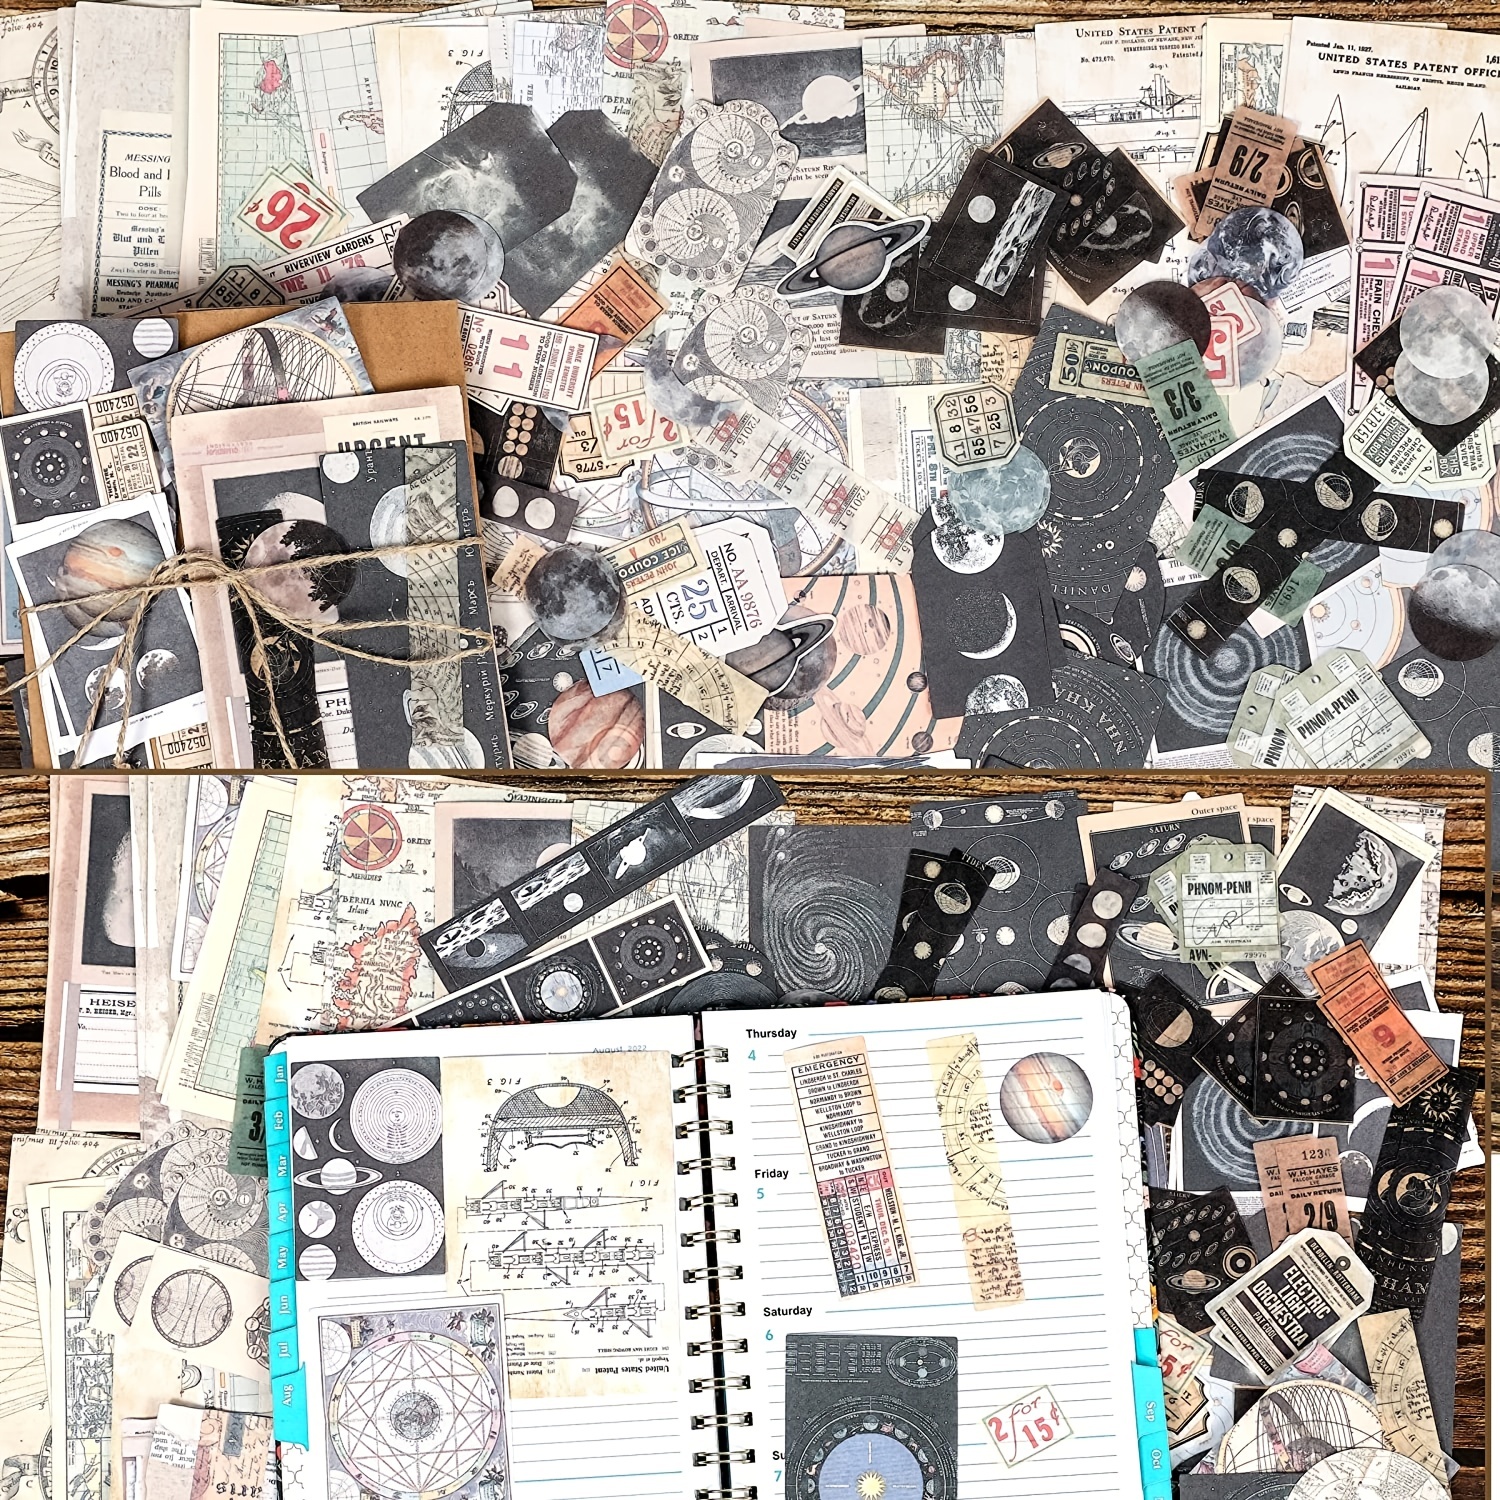  Comealltime Scrapbooking Supplies Stickers(121pcs), Vintage  Aesthetic Scrapbook Kit with Washi Stickers, Hobby Knife, Decoupage Papers  for Bullet Journals, Craft DIY Gift - Black